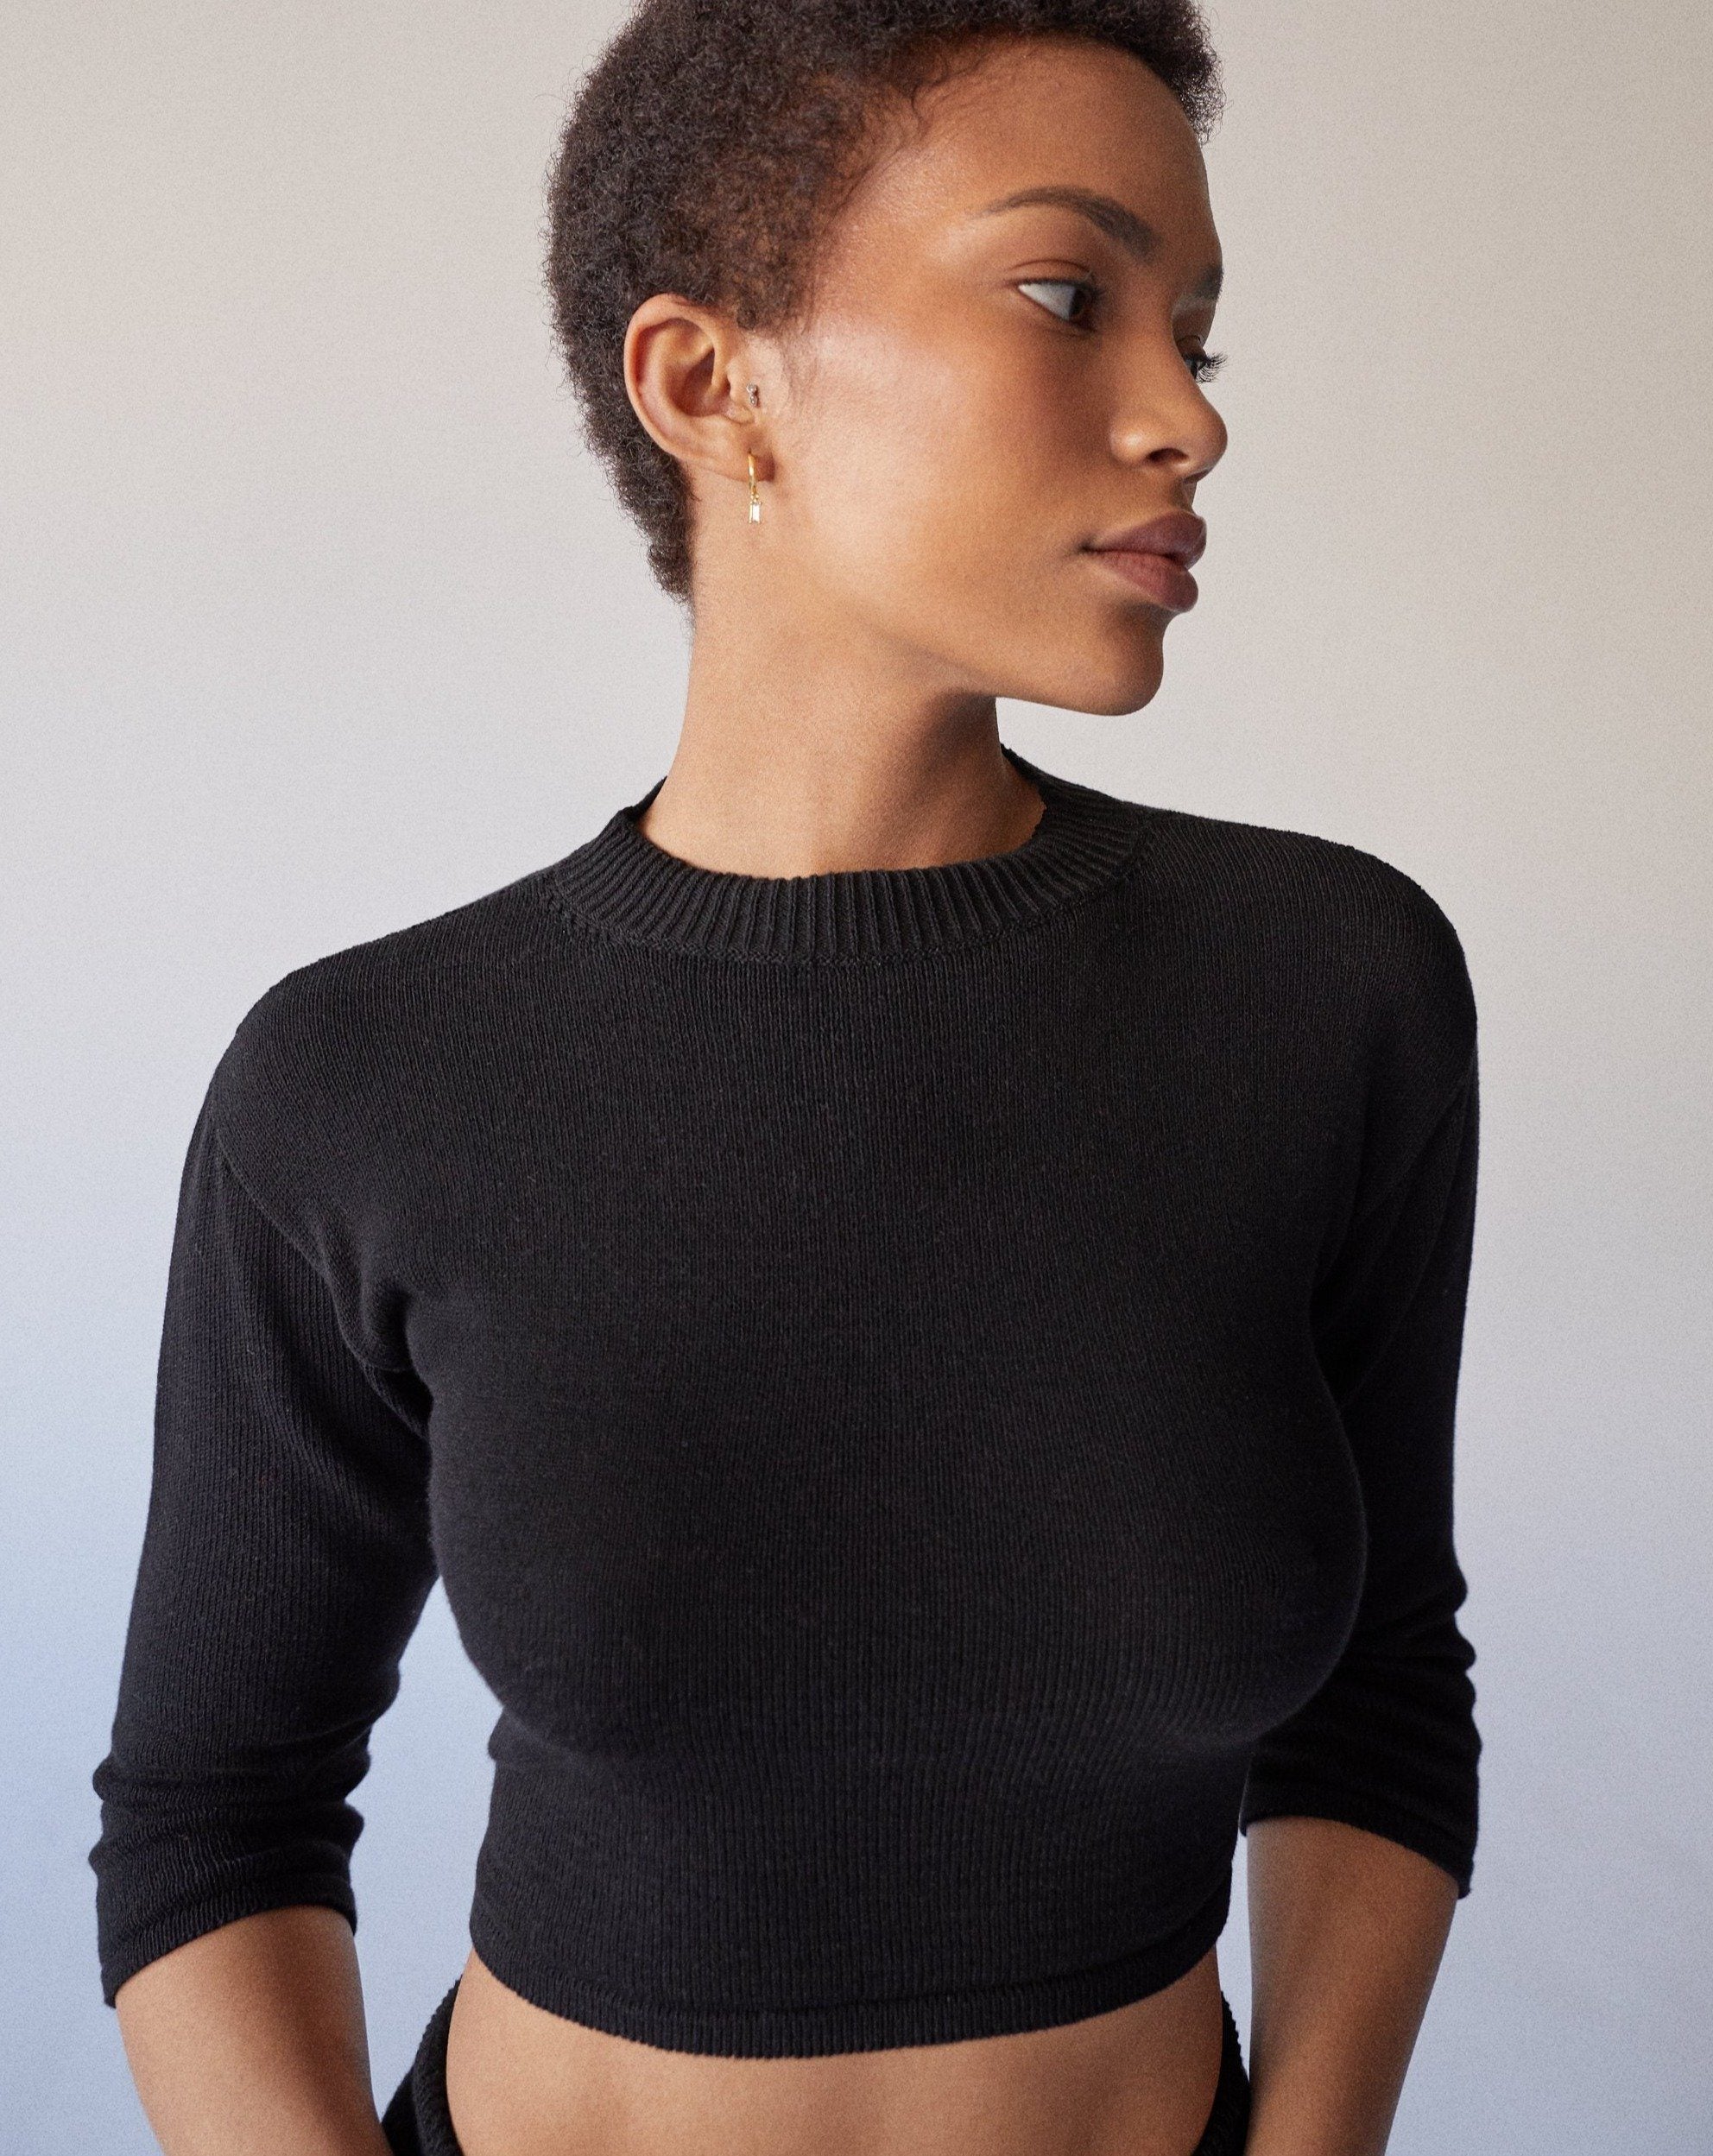 Relaxed Knit Backless Top Black product